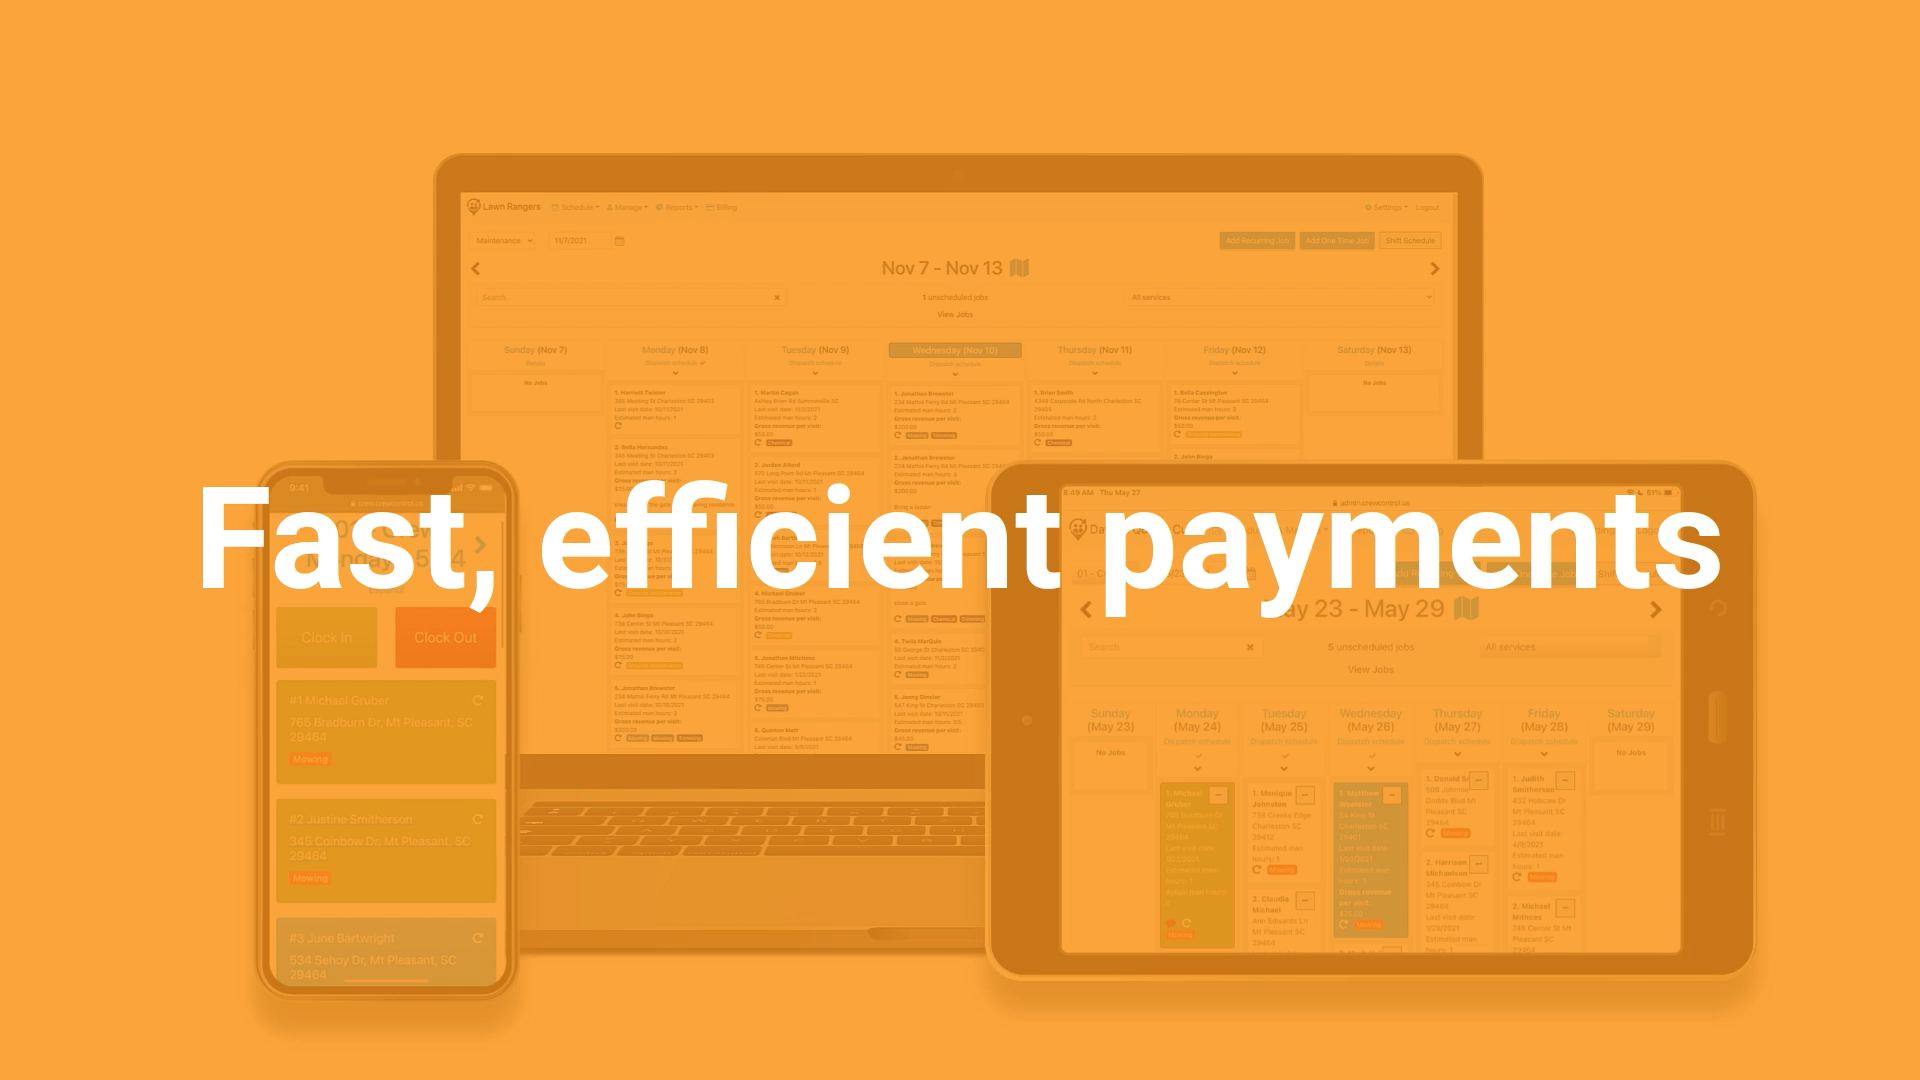 How contractors save time, automate tasks, and reduce processing fees with Crew Control’s electronic payments technology